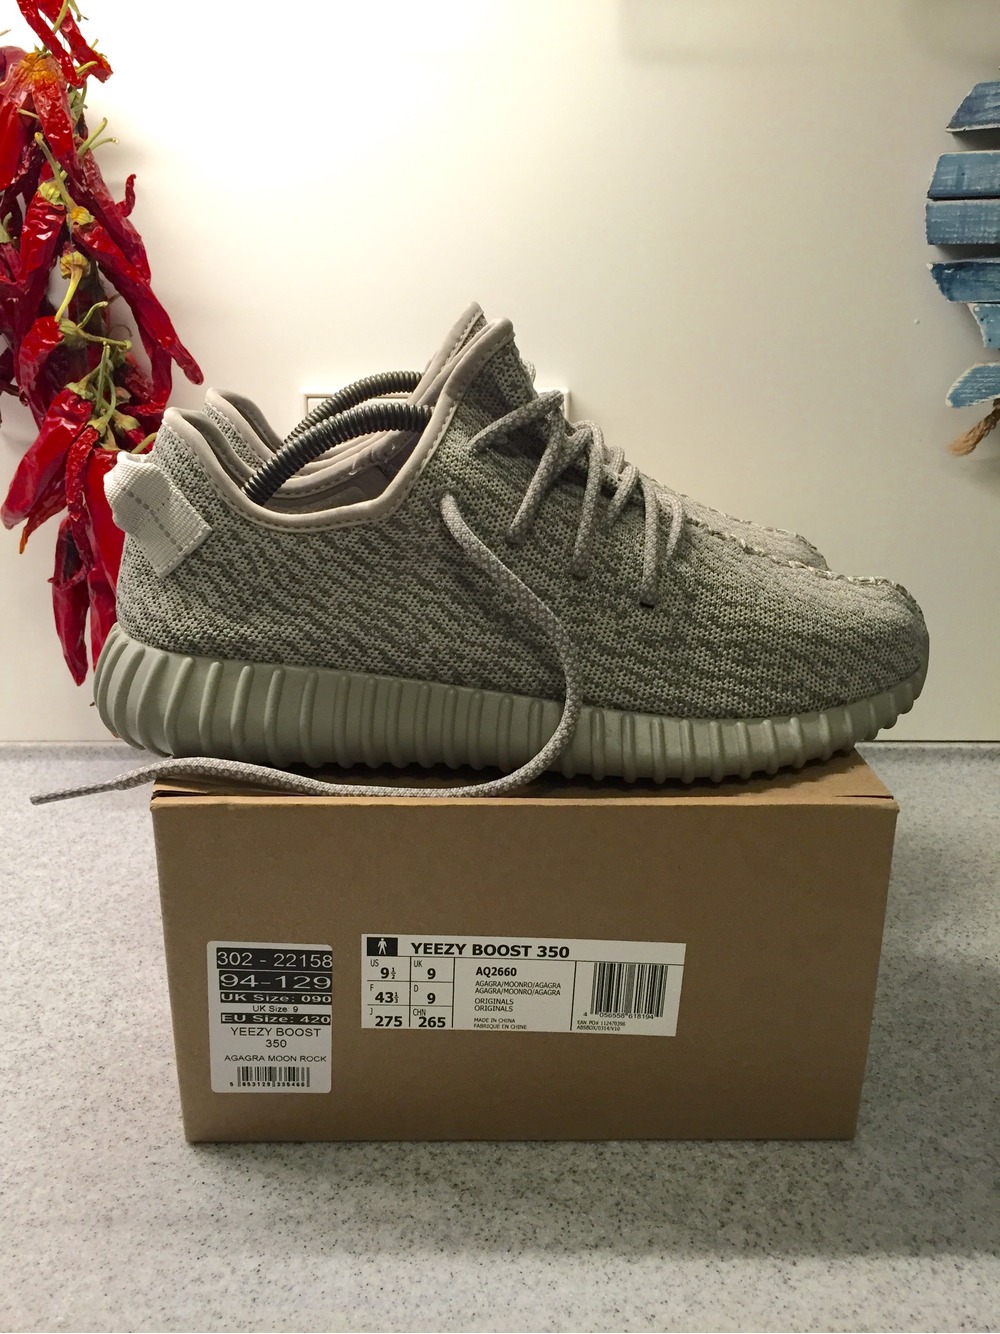 Kanye West's New Yeezy Boost 350 Moonrock Sneakers Are